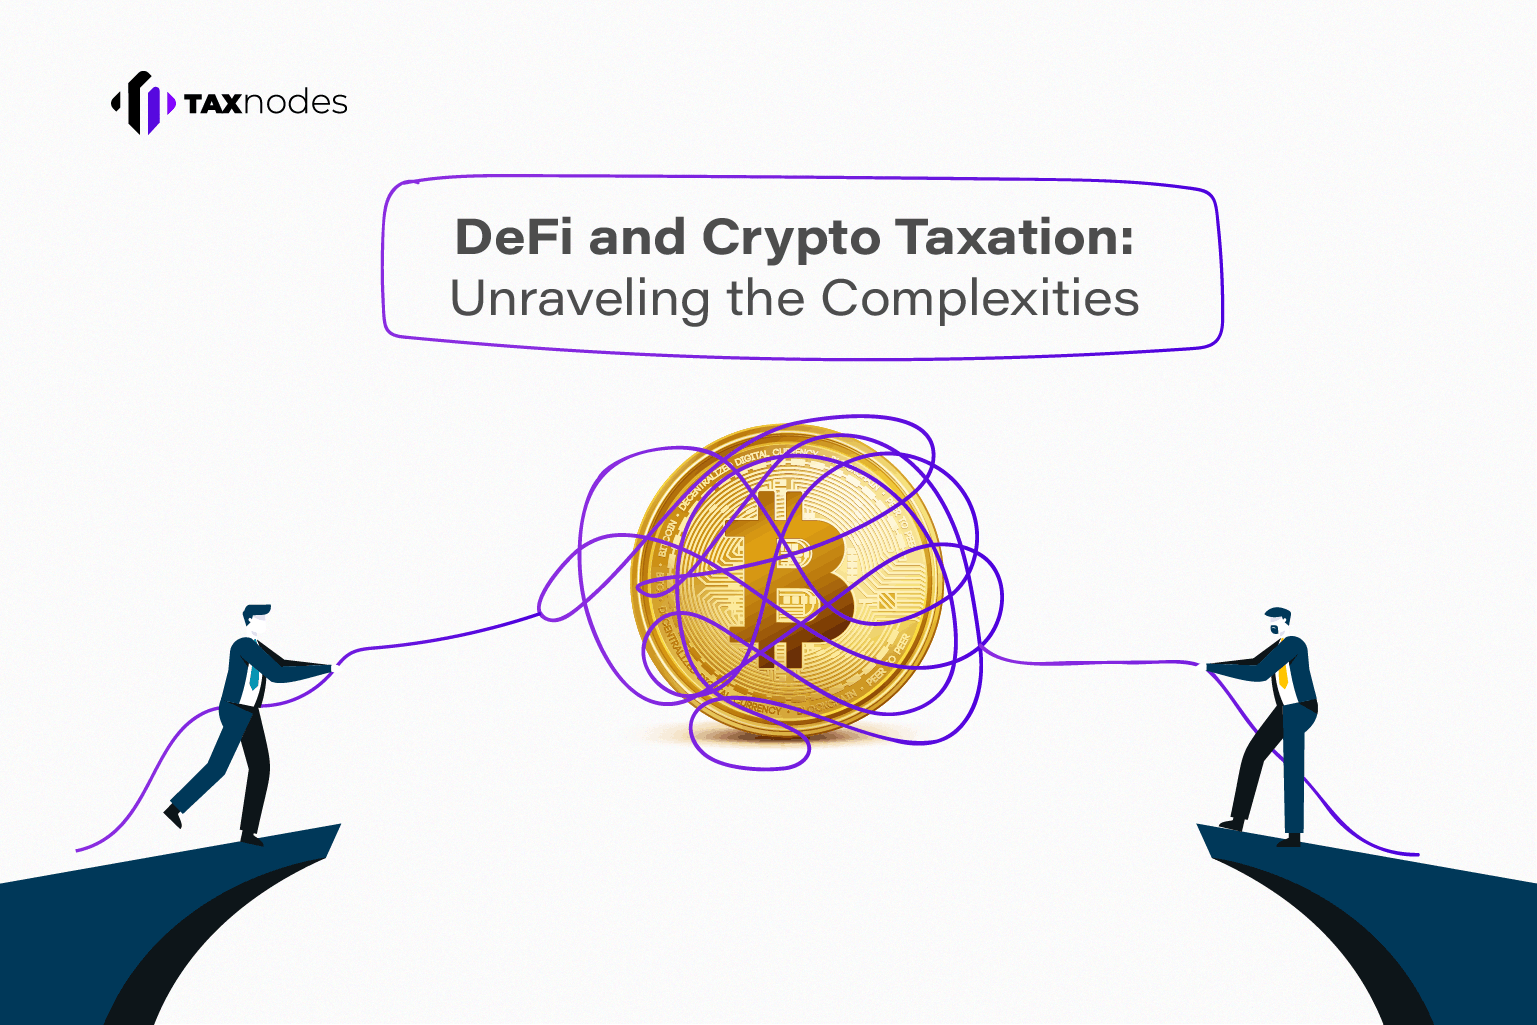 Defi and crypto taxation: unraveling the complexities